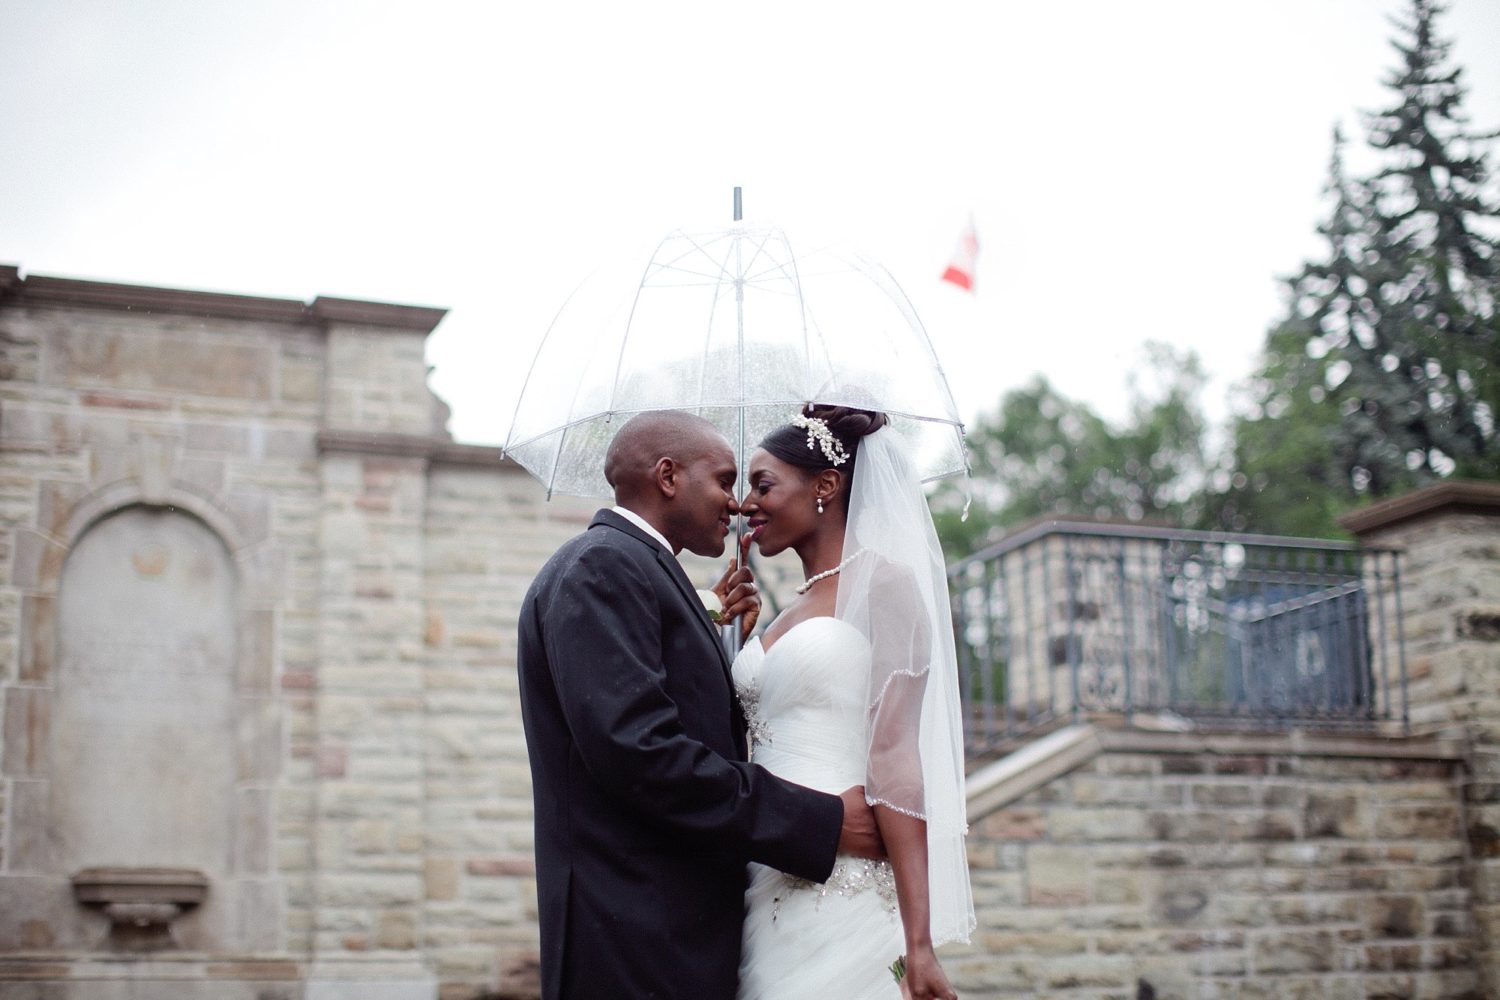 Wedding photography in the rain, couple standing under clear umbrella.